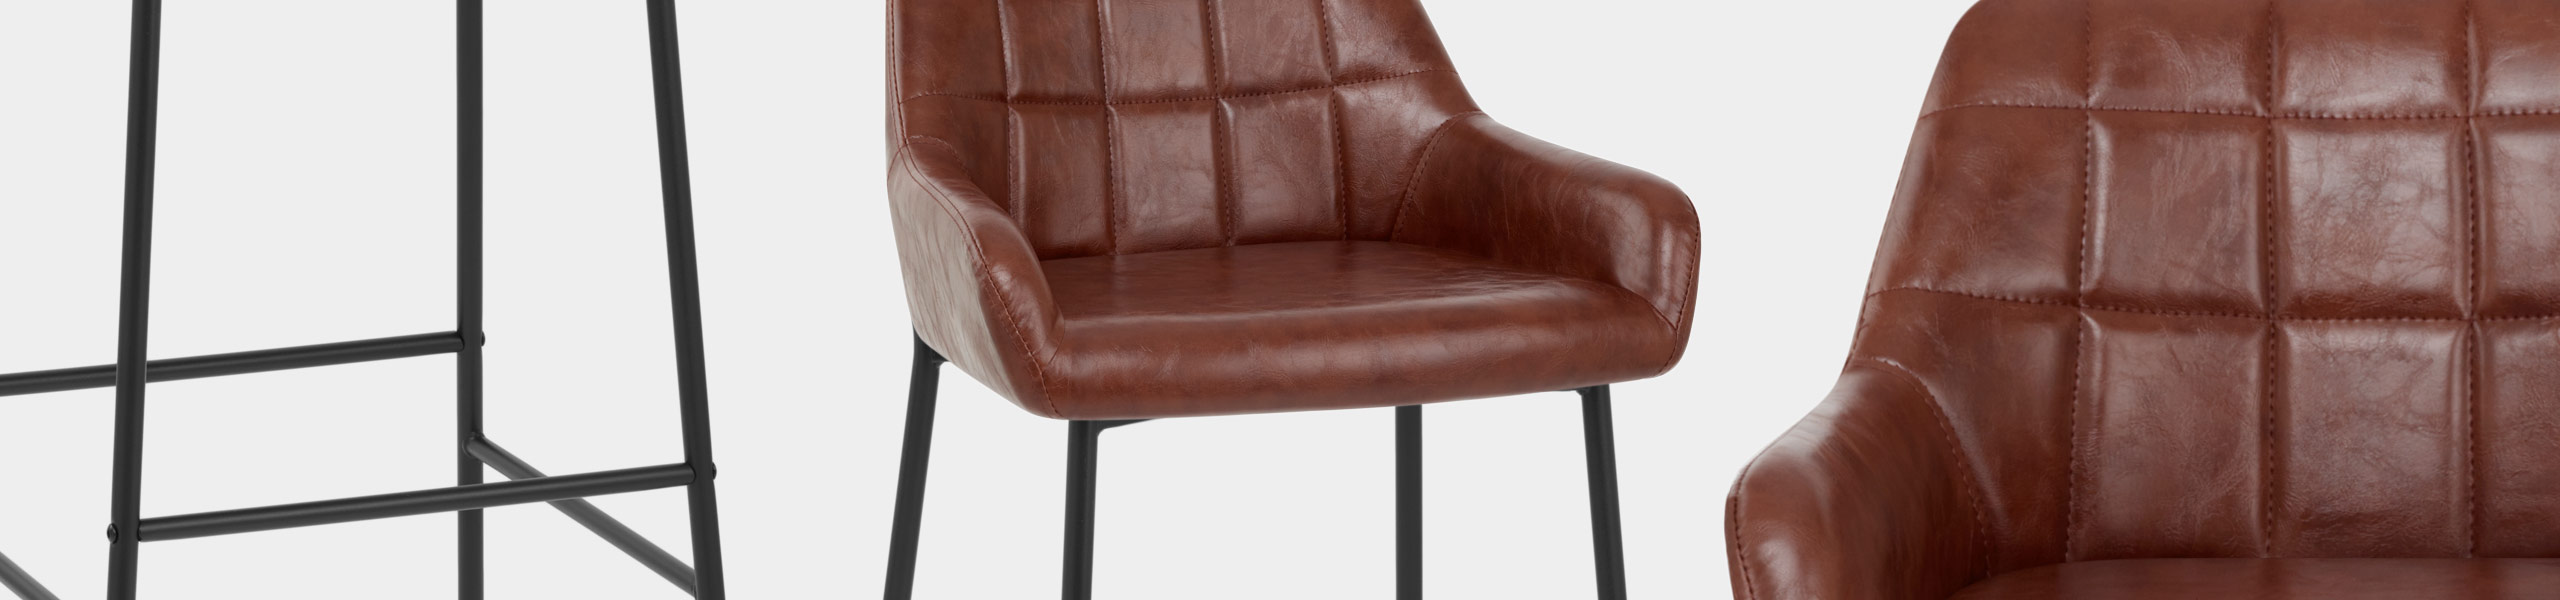 Falcon Stool Antique Brown Video Banner